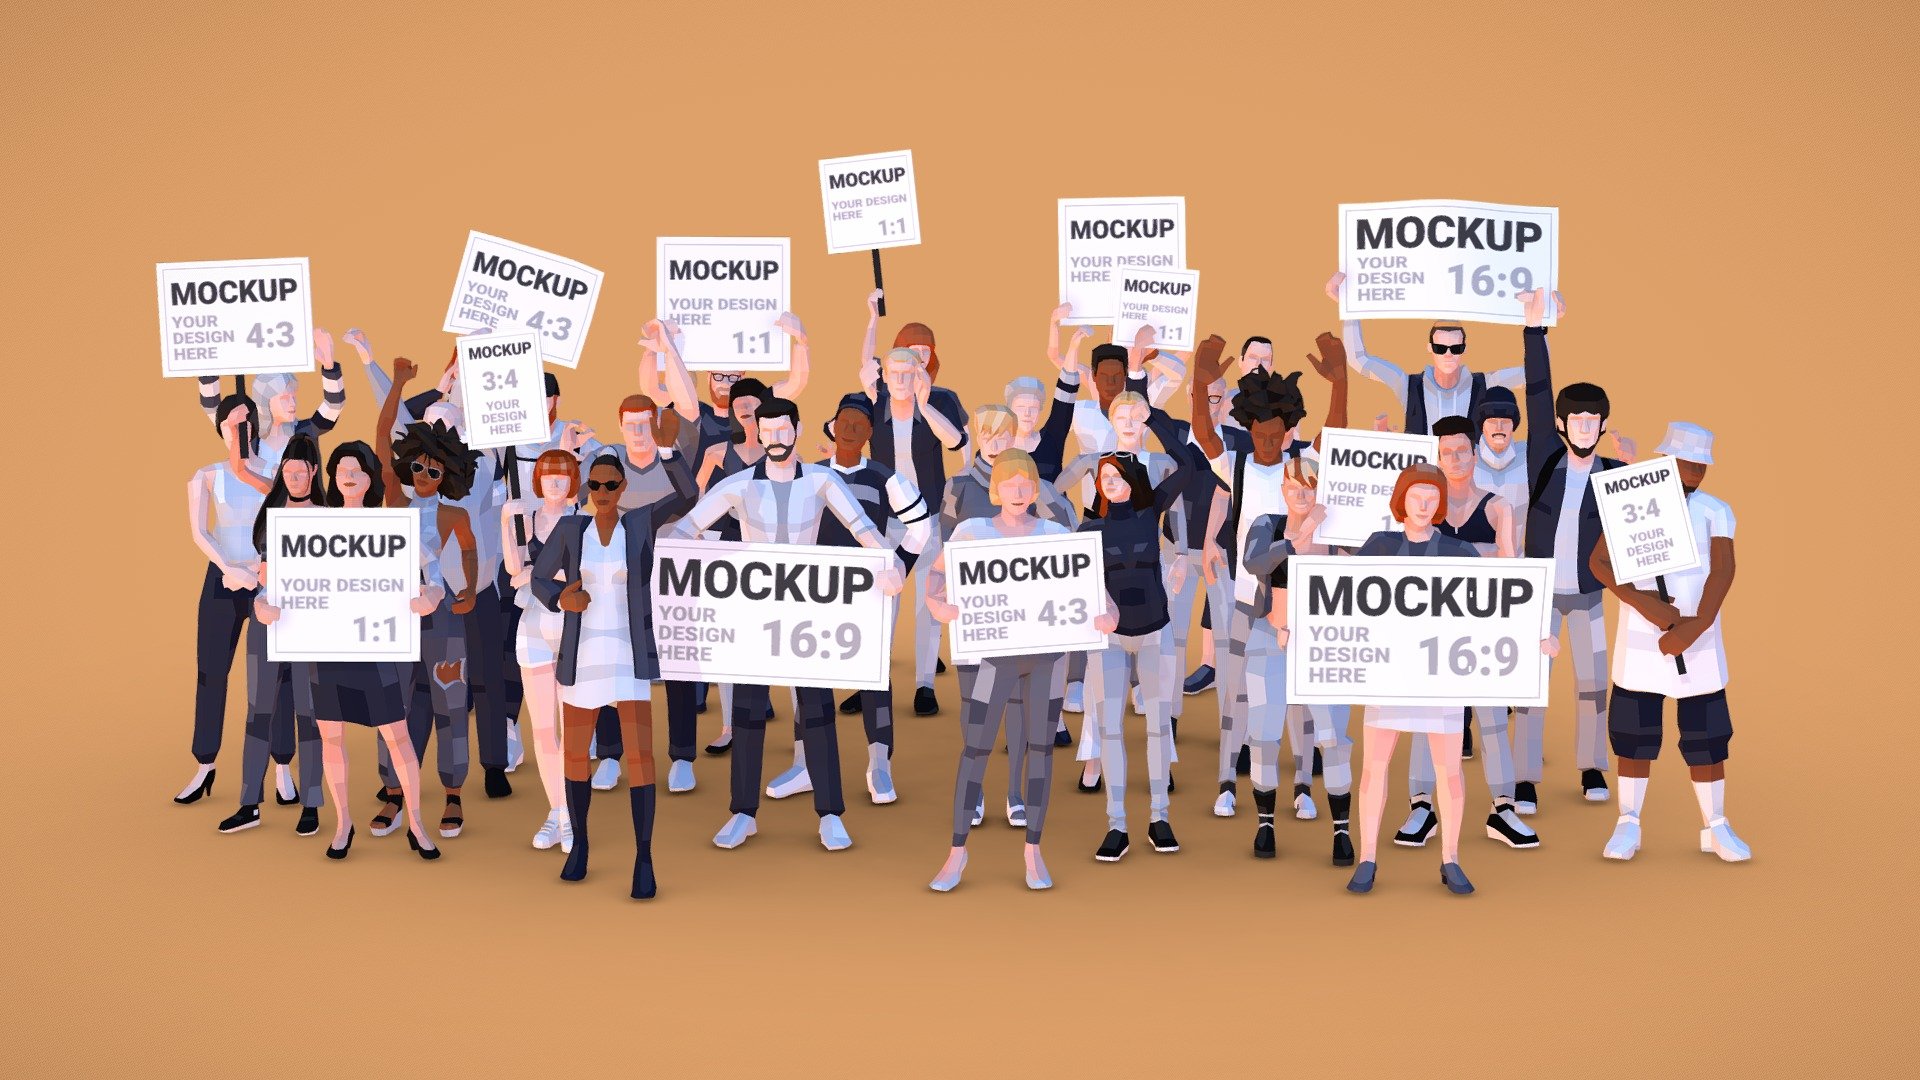 Replace sign textures with your own messages and desings. Great for graphical design or interactive 3D webs.

Static posed characters protesting holding mockup sings. Placeholder textures indicates their aspect ratio. 

For customizing the character look there are more than 20 texture variations.

Free sample here: People Protesting Free. 

See alternative rigged asset pack for games and animations: City People Mega-Pack - People Protesting Mockup Low-Poly Style - Buy Royalty Free 3D model by Denys Almaral (@denysalmaral) 3d model